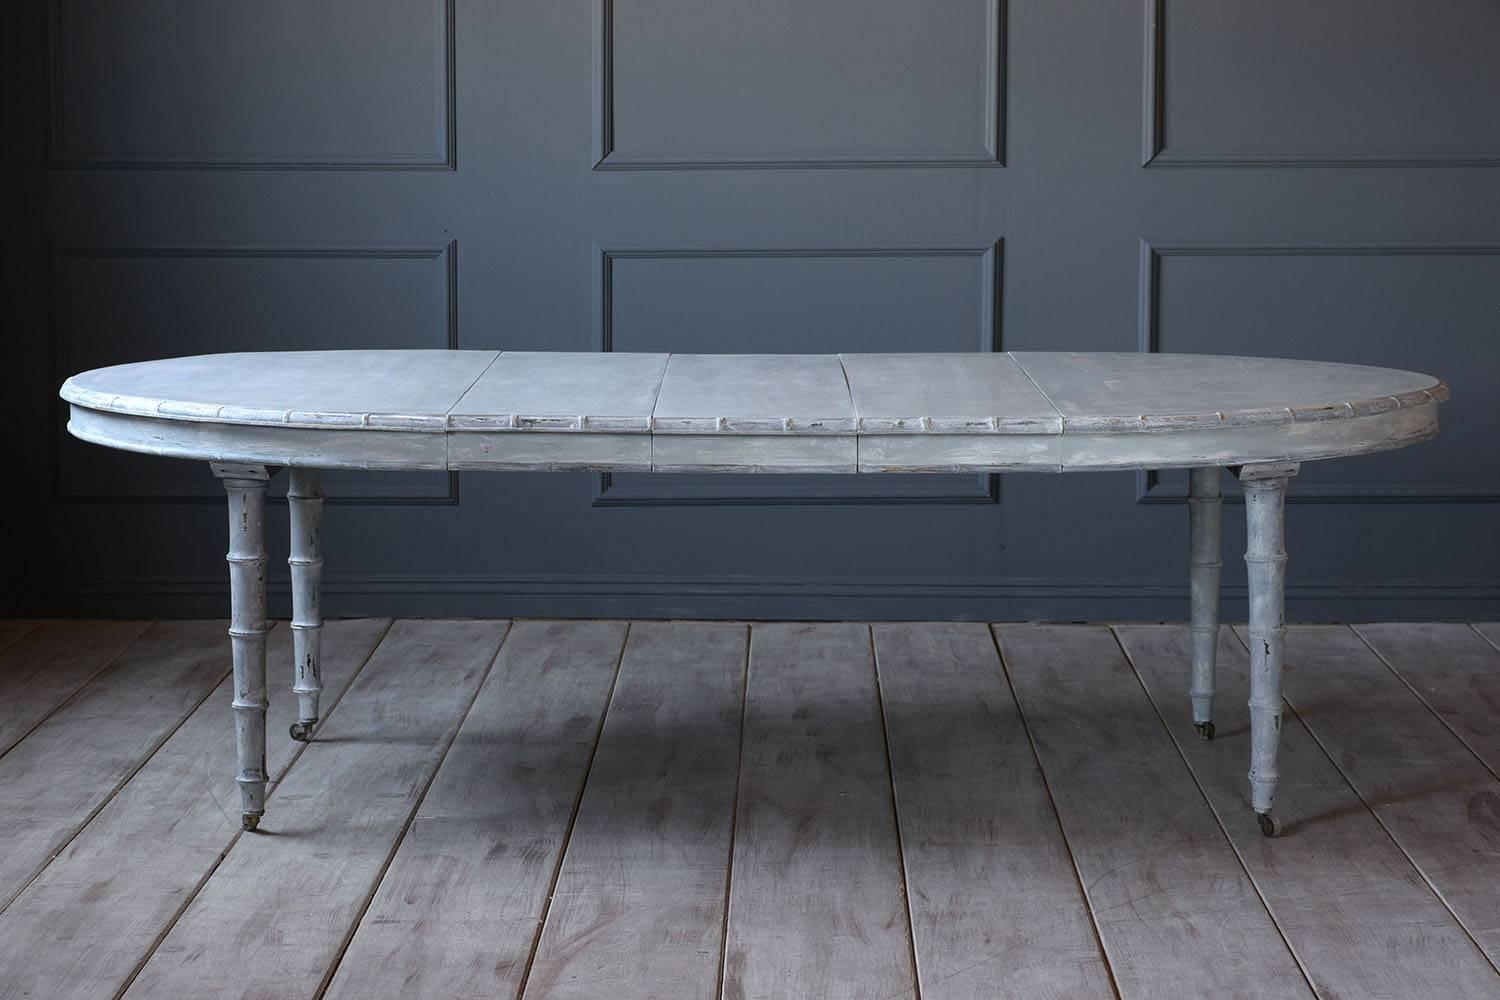 This 1900s French chinoiserie style oval walnut wood dining table is painted in a pale gray and off-white with a distressed finish. The edges and legs of the table have faux bamboo carved accents. The table is accompanied by the original three